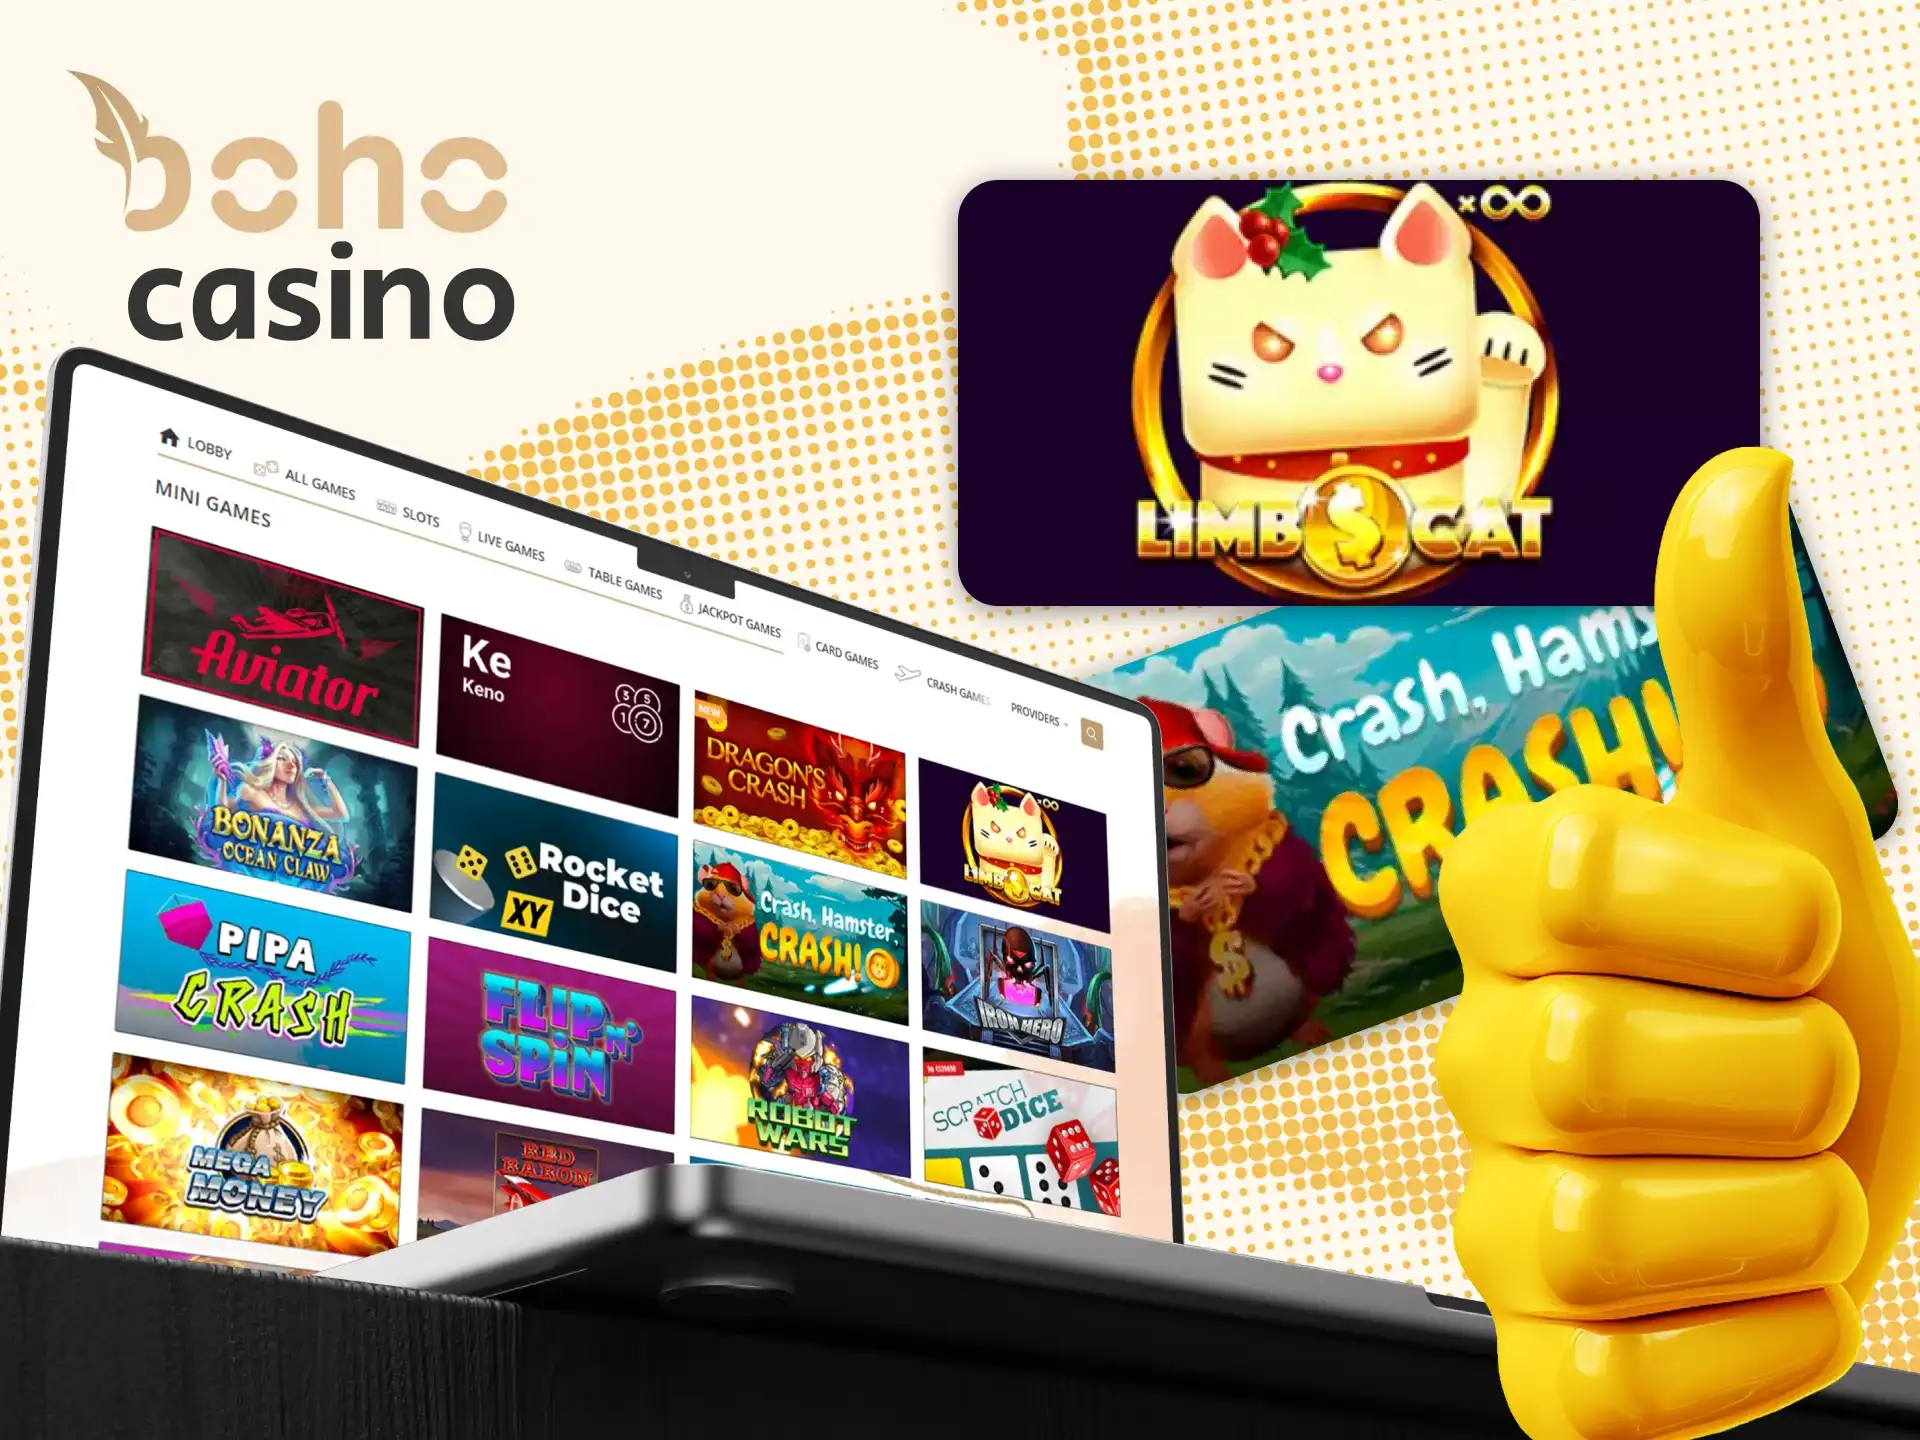 Boho online casino has popular and famous mini-games for New Zealand players.